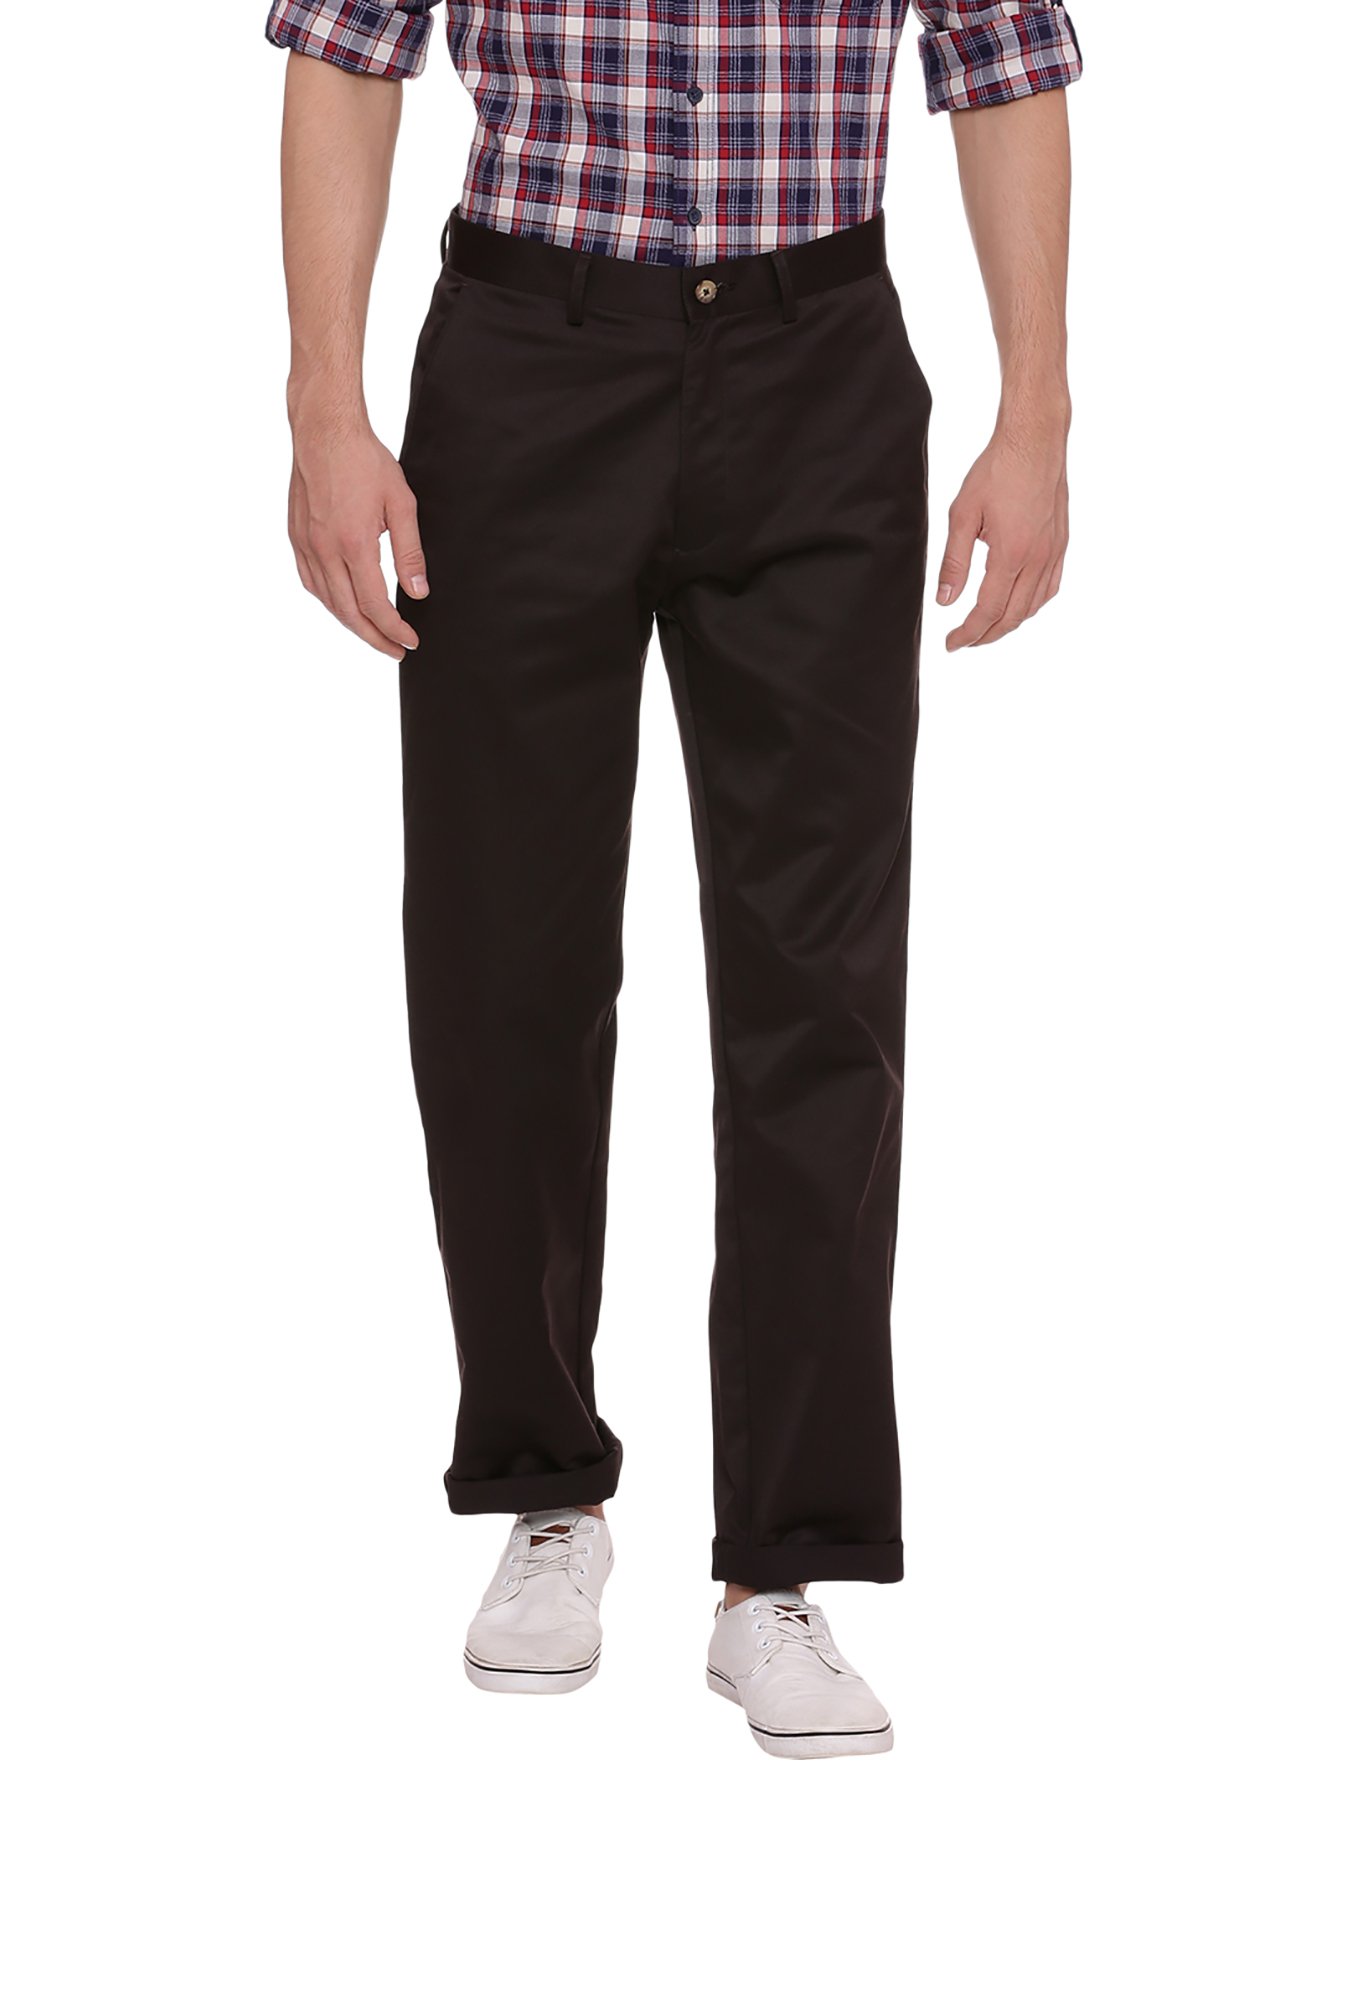 Brown All Weather Essential Stretch Pants